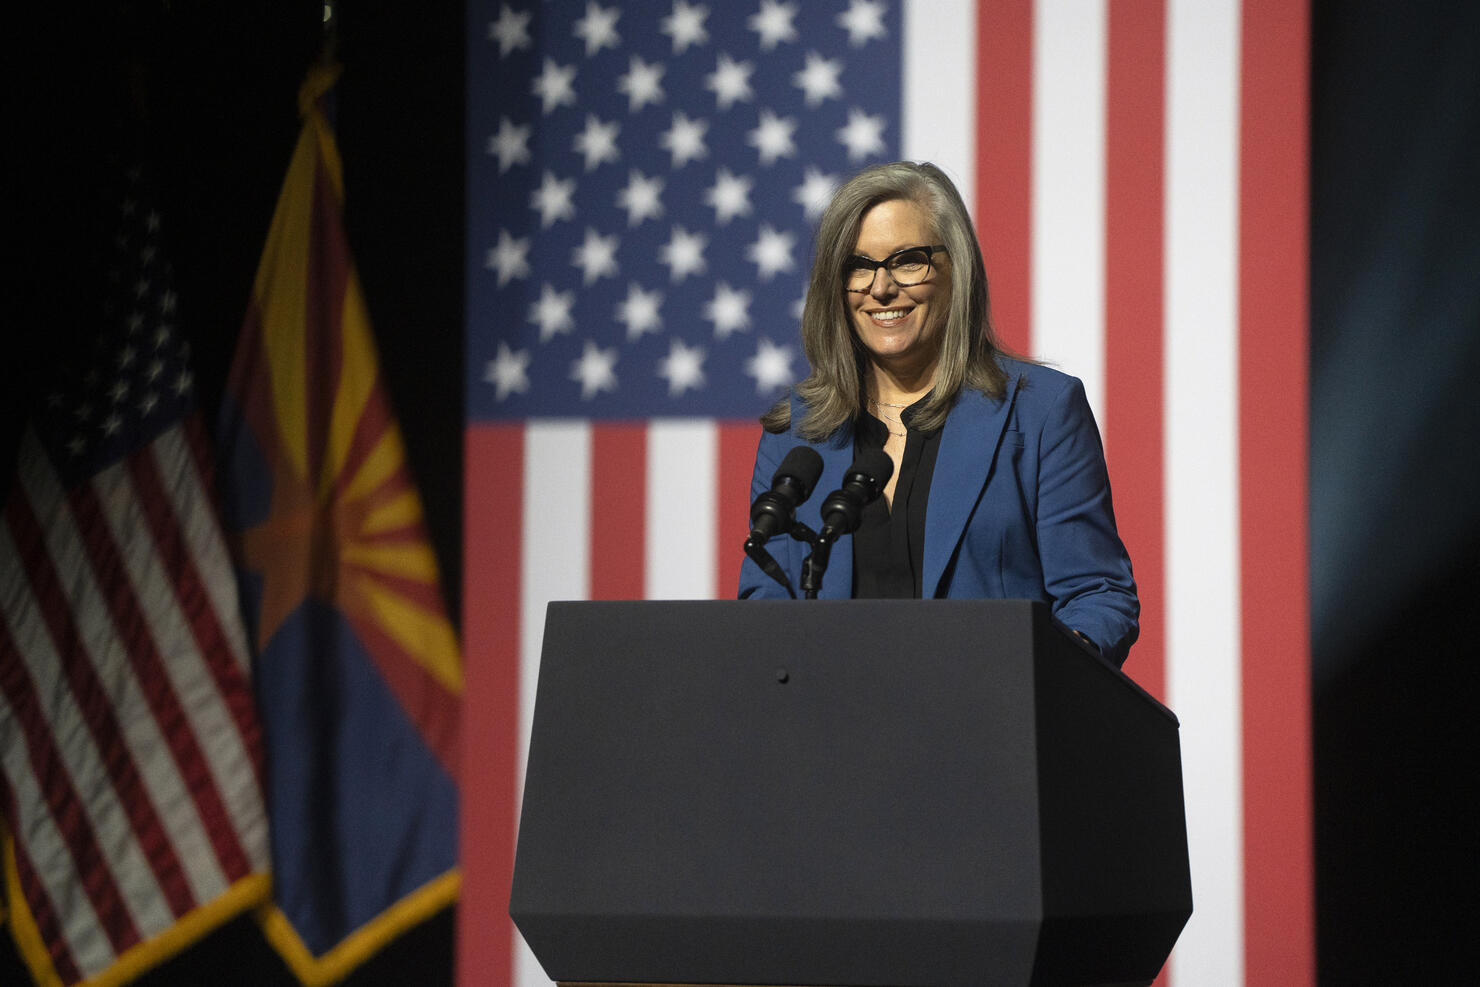 Arizona Gov. Katie Hobbs gives a brief speech prior to President Joe Biden's remarks at the Tempe Center for the Arts on September 28, 2023 in Tempe, Arizona. 